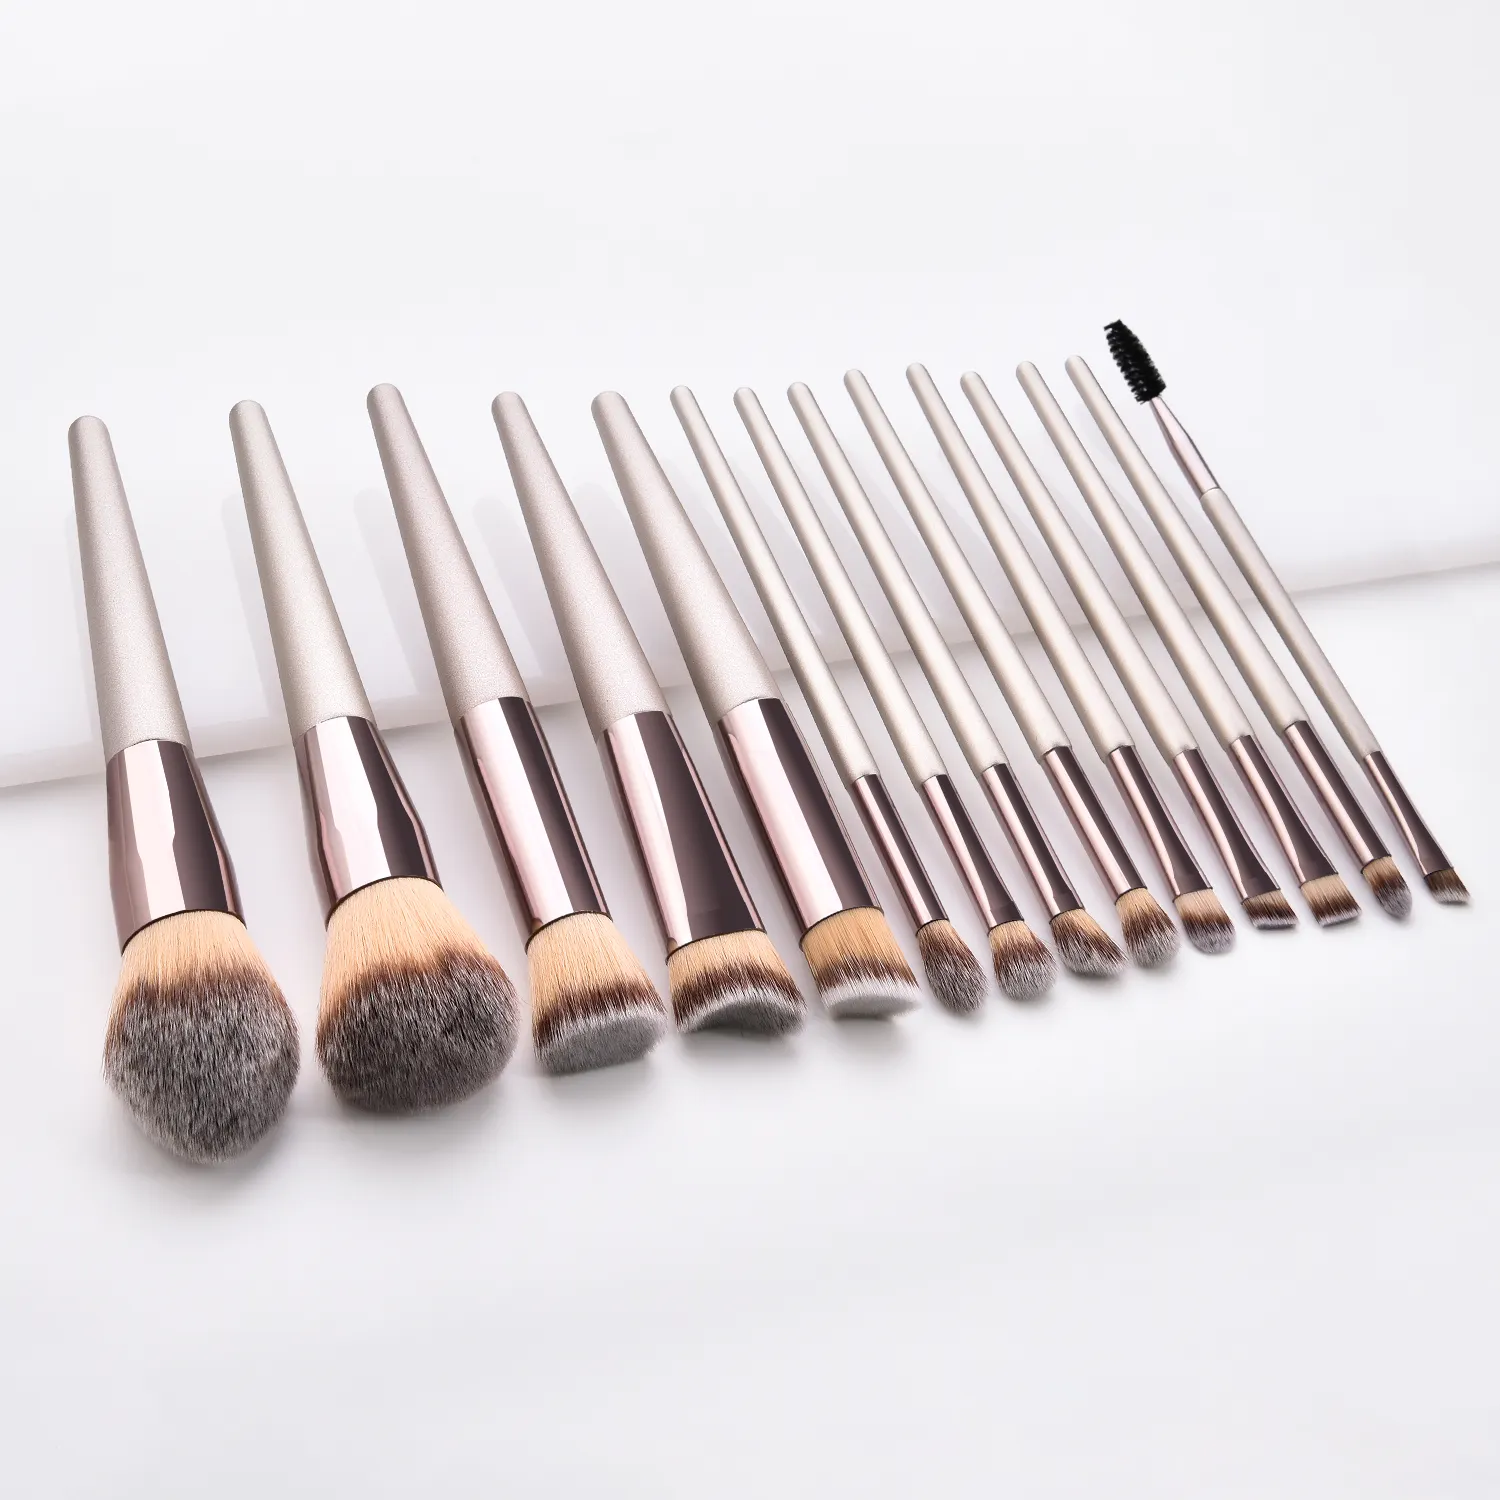 Best seller private label wholesale makeup brush kit silky soft professional cosmetics cruelty free makeup brush set